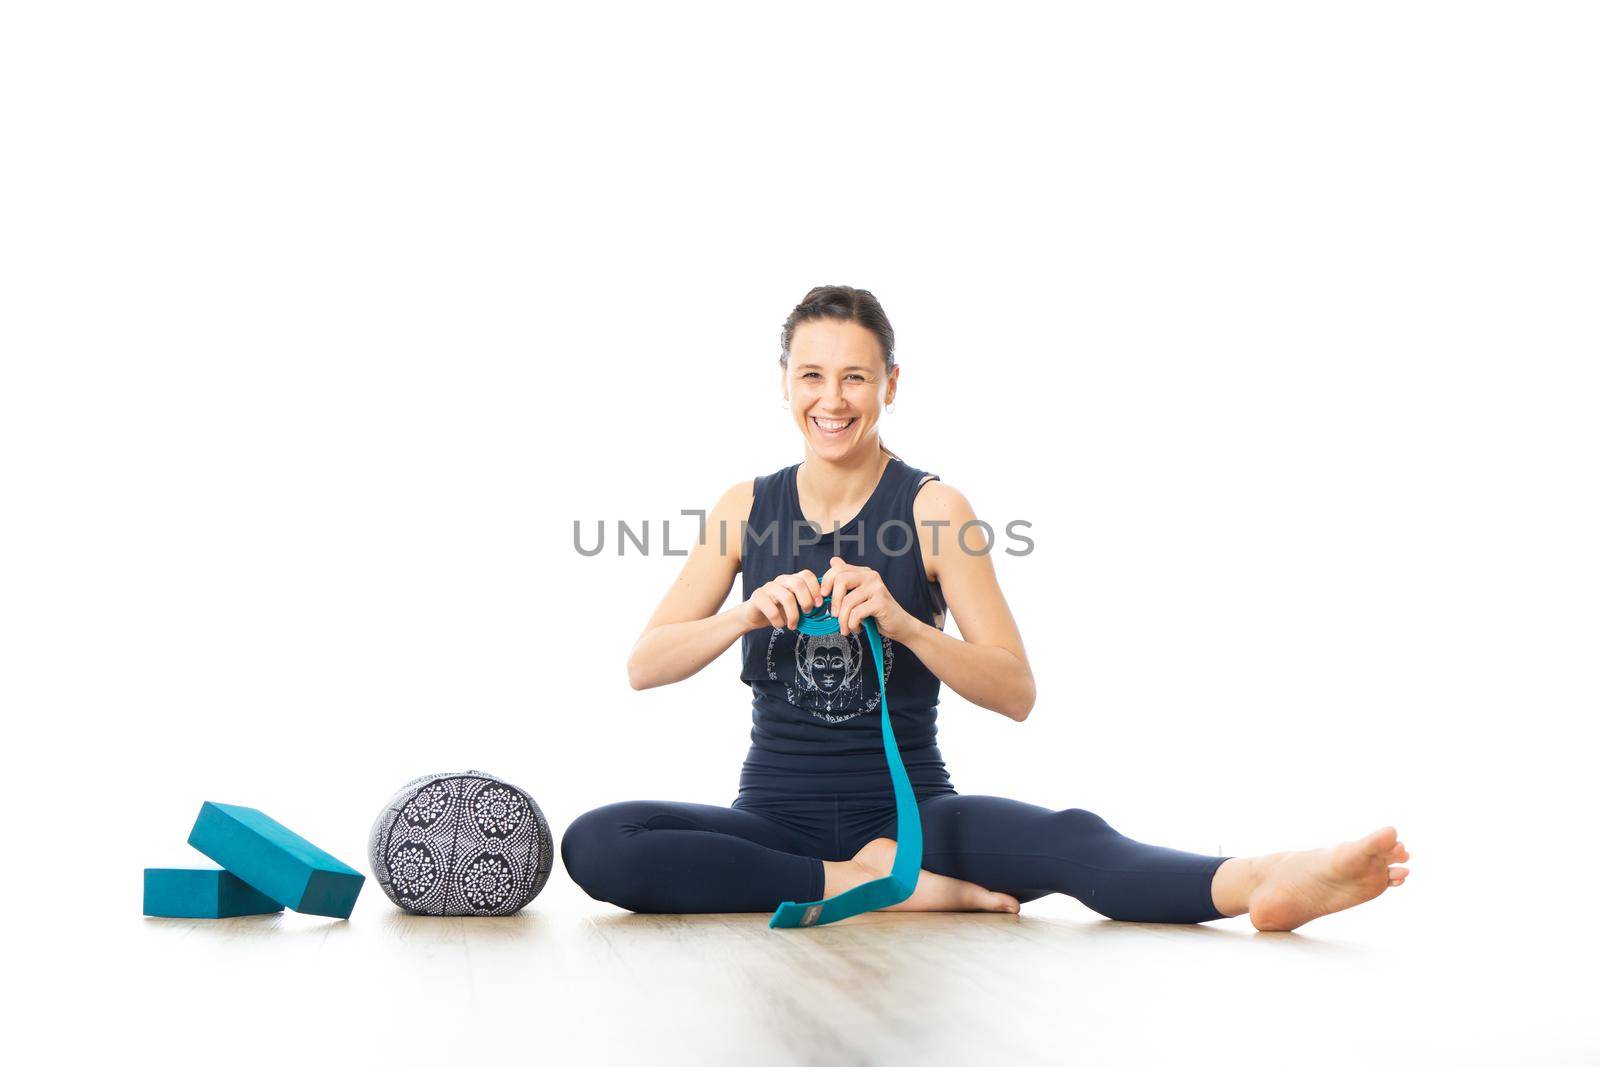 Restorative yoga with a bolster. Young sporty female yoga instructor in bright white yoga studio, smiling cheerfully while preparing restorative yoga exercise props by kasto